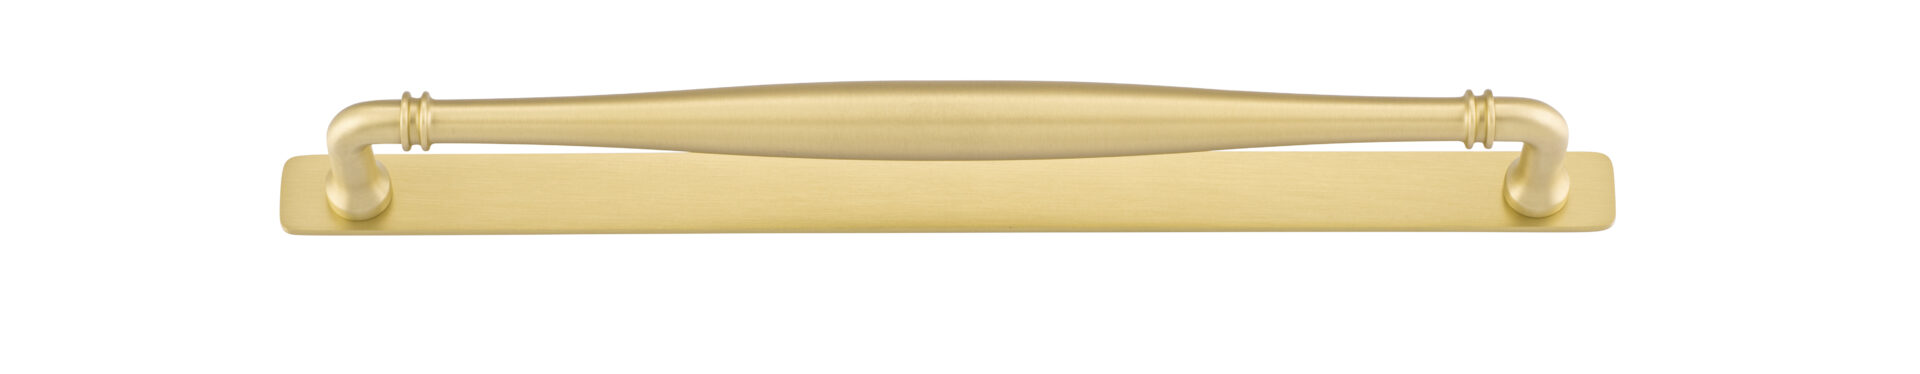 17107B - Sarlat Cabinet Pull with Backplate - CTC320mm - Brushed Gold PVD